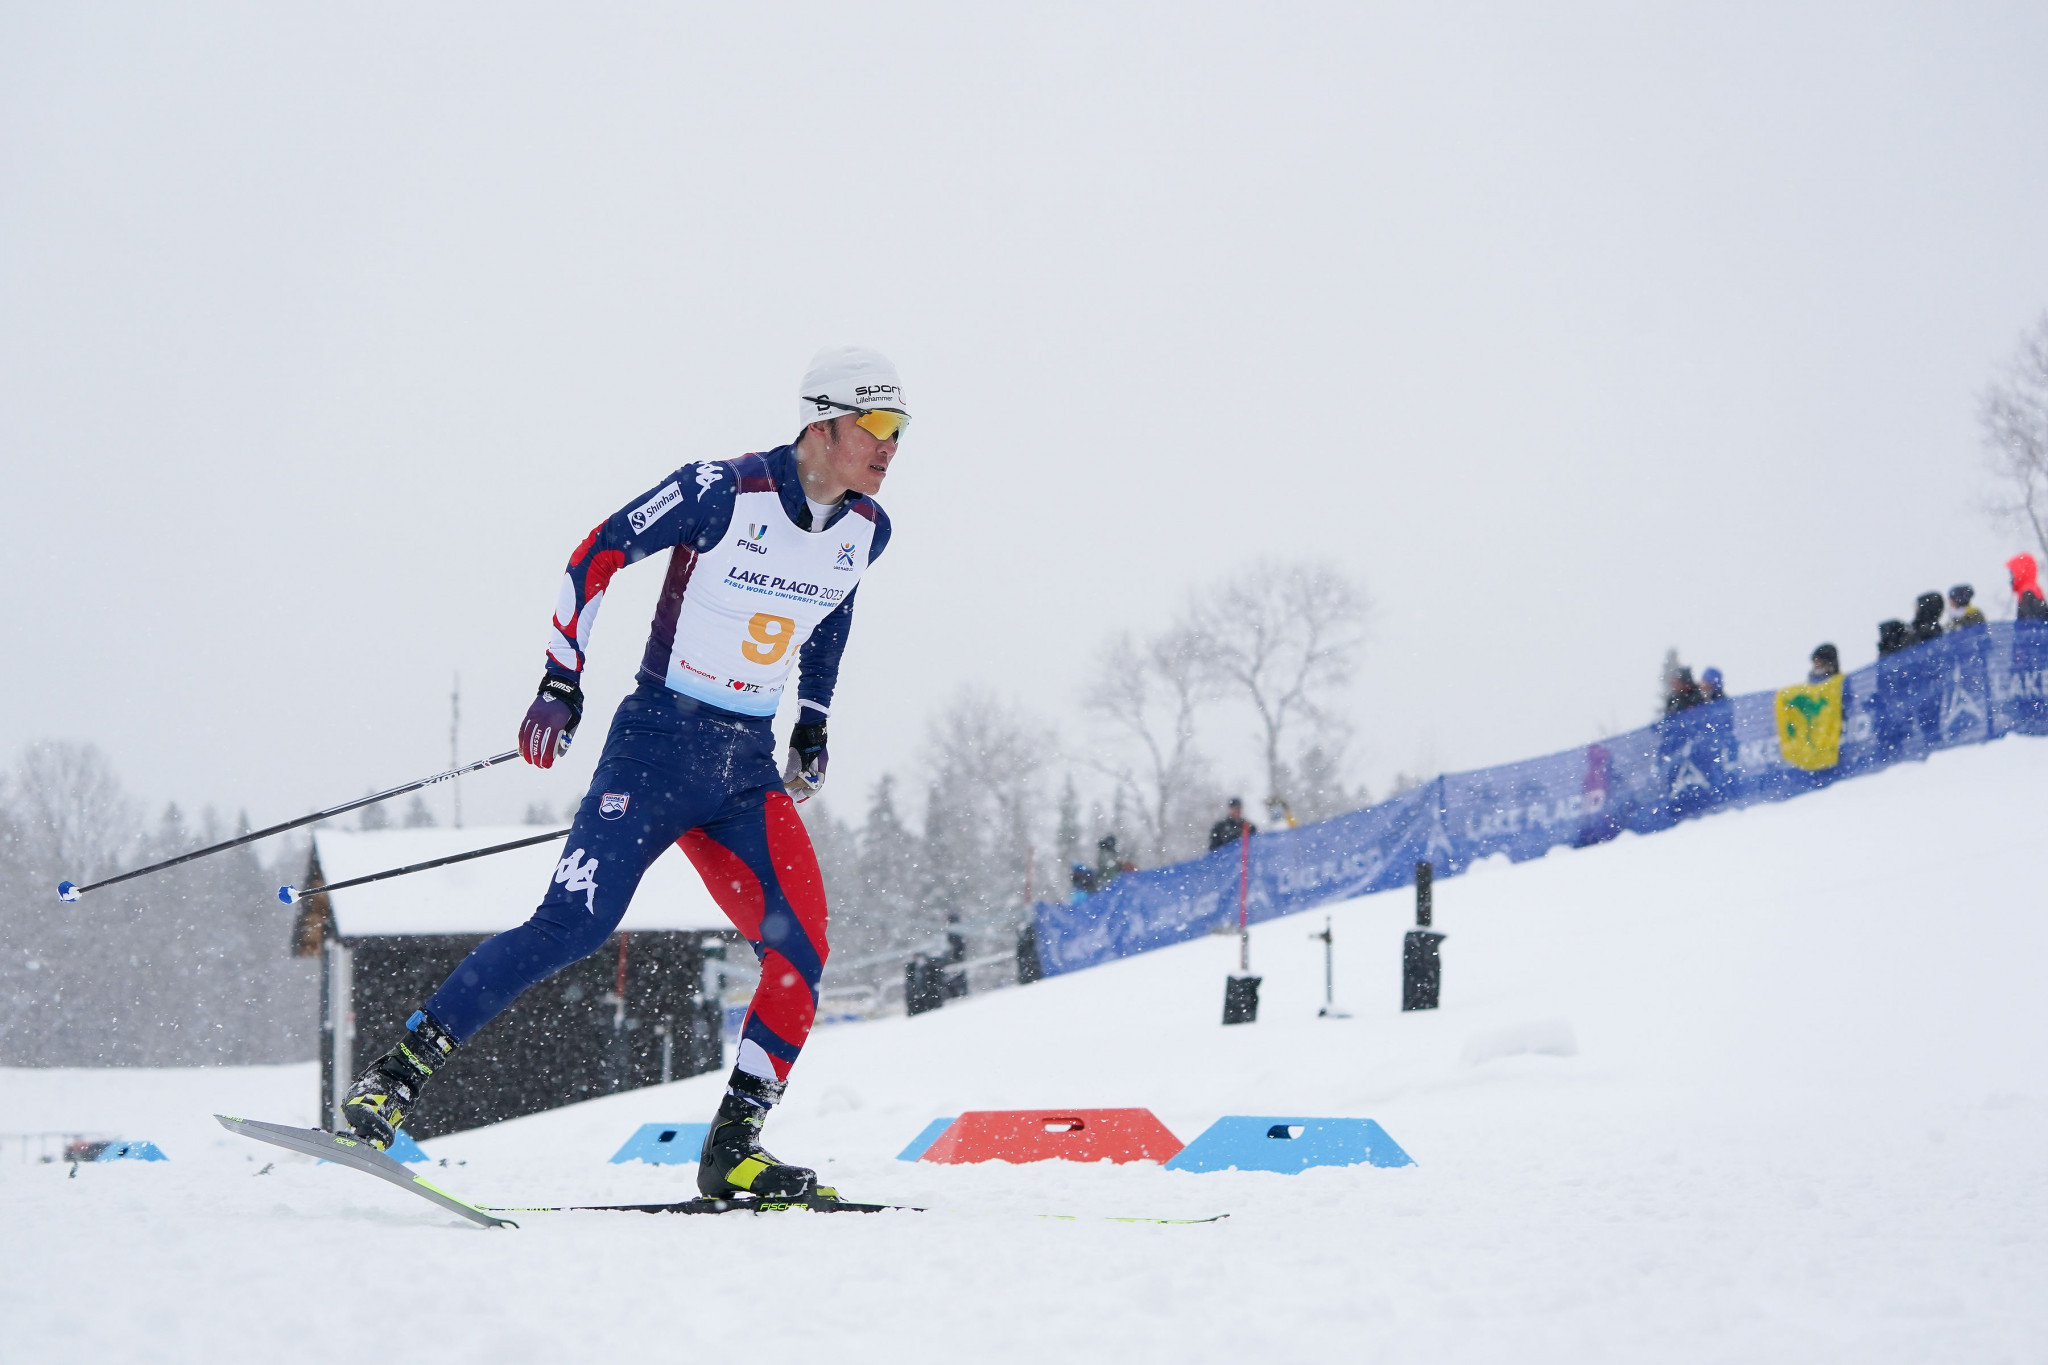 France benefitted from a costly Czech mistake to win men's 4x7.5km cross country skiing relay ©FISU